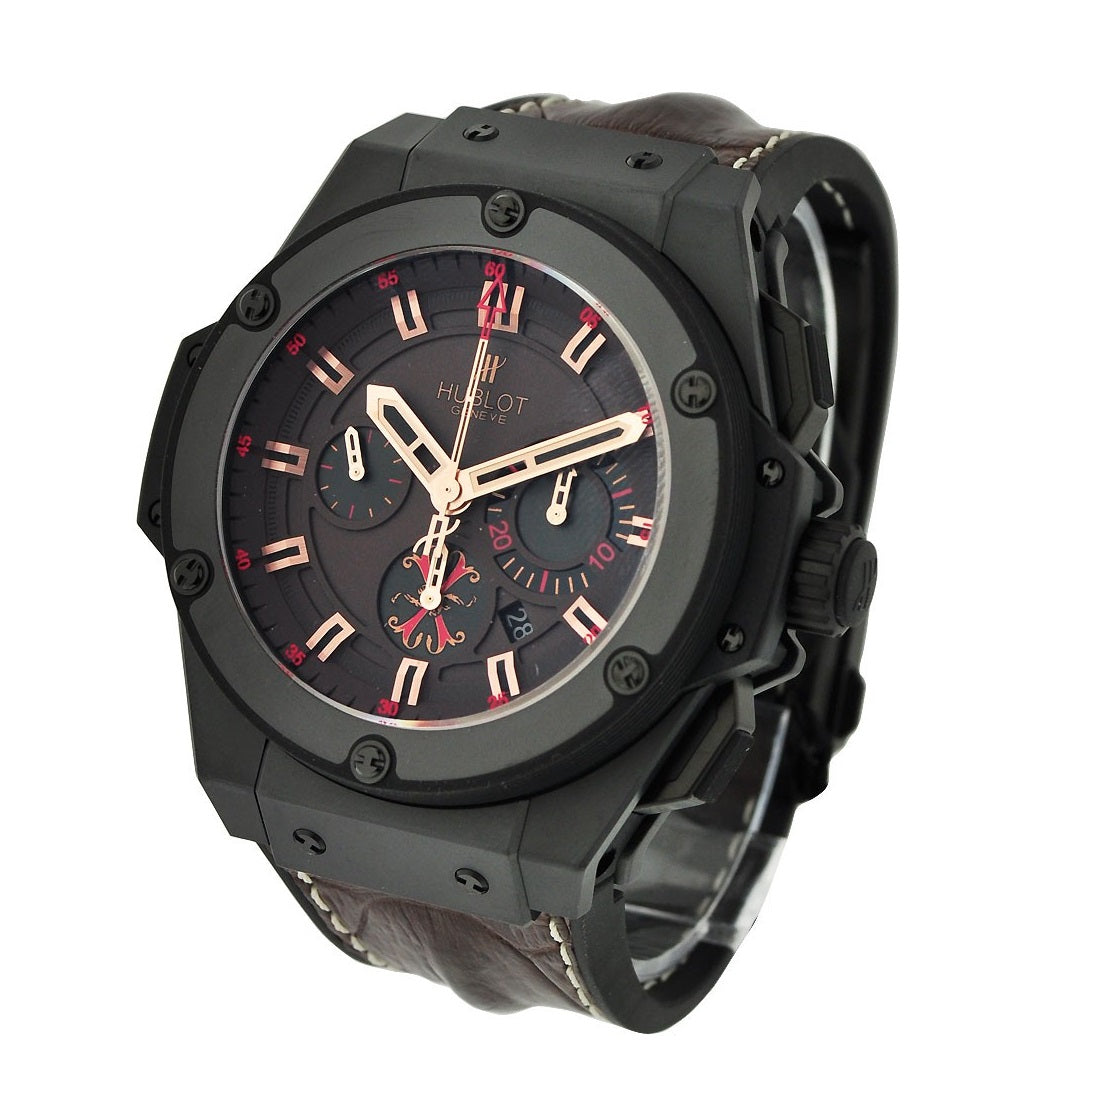 HUBLOT Big Bang Arturo Fuentes Limited Edition Automatic Brown Dial Watch - 703.CI.3113.HR.OPX12